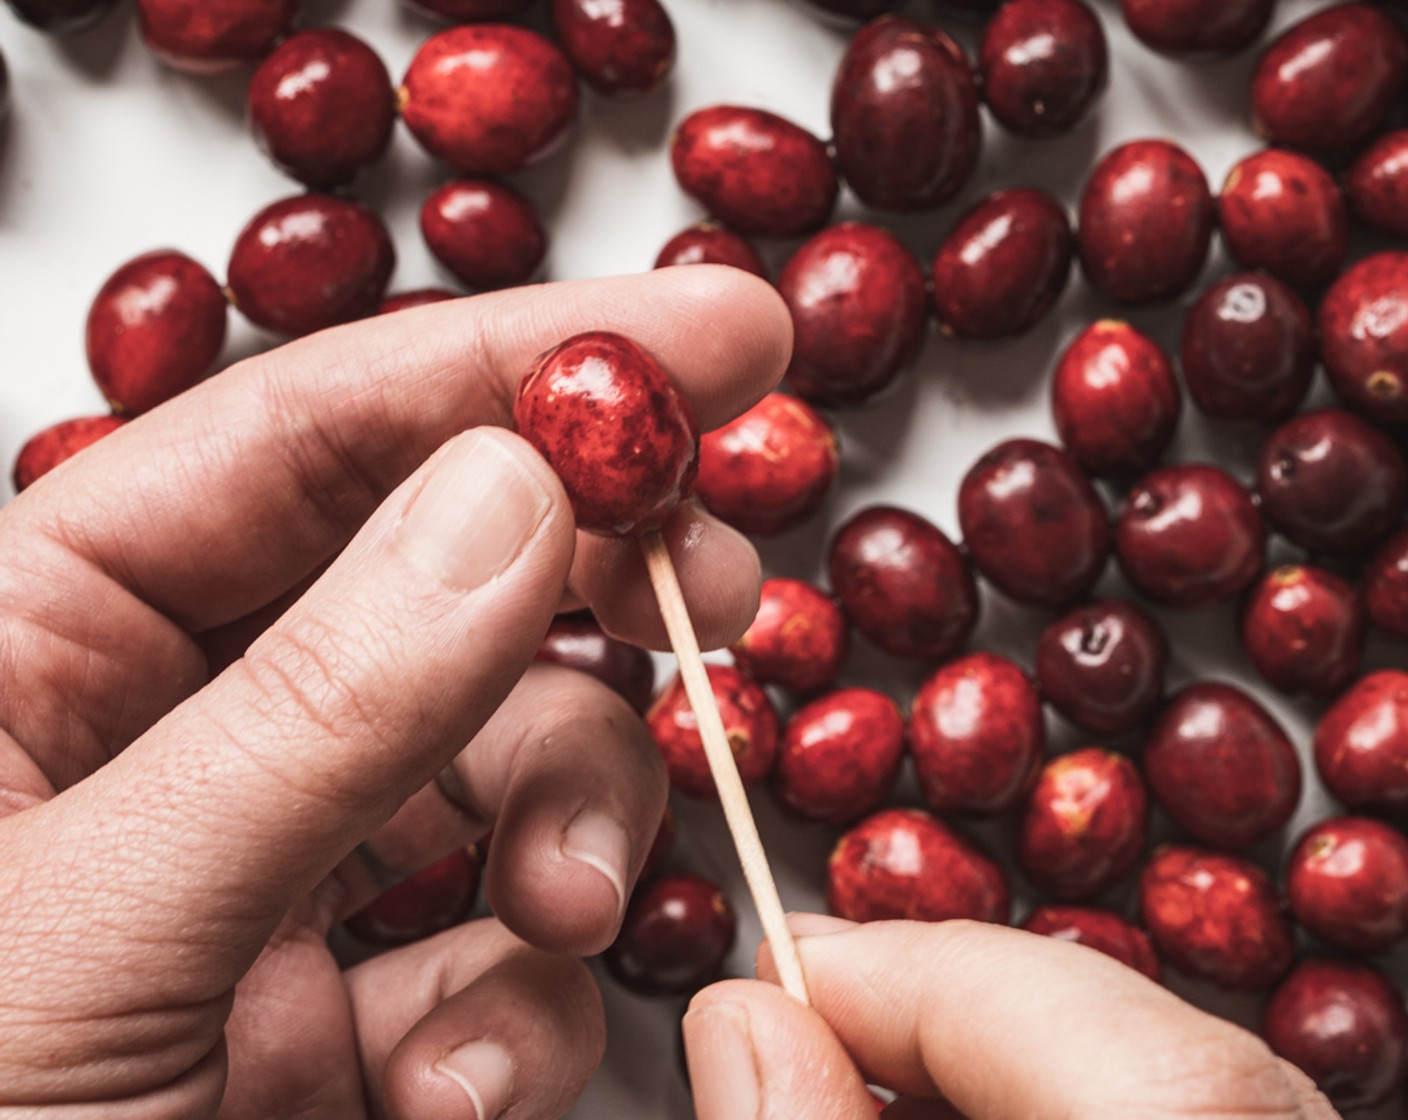 step 2 Slice any especially large cranberries in half and prick the rest with a toothpick, adding each prepared cranberry to a bowl to keep them sorted.